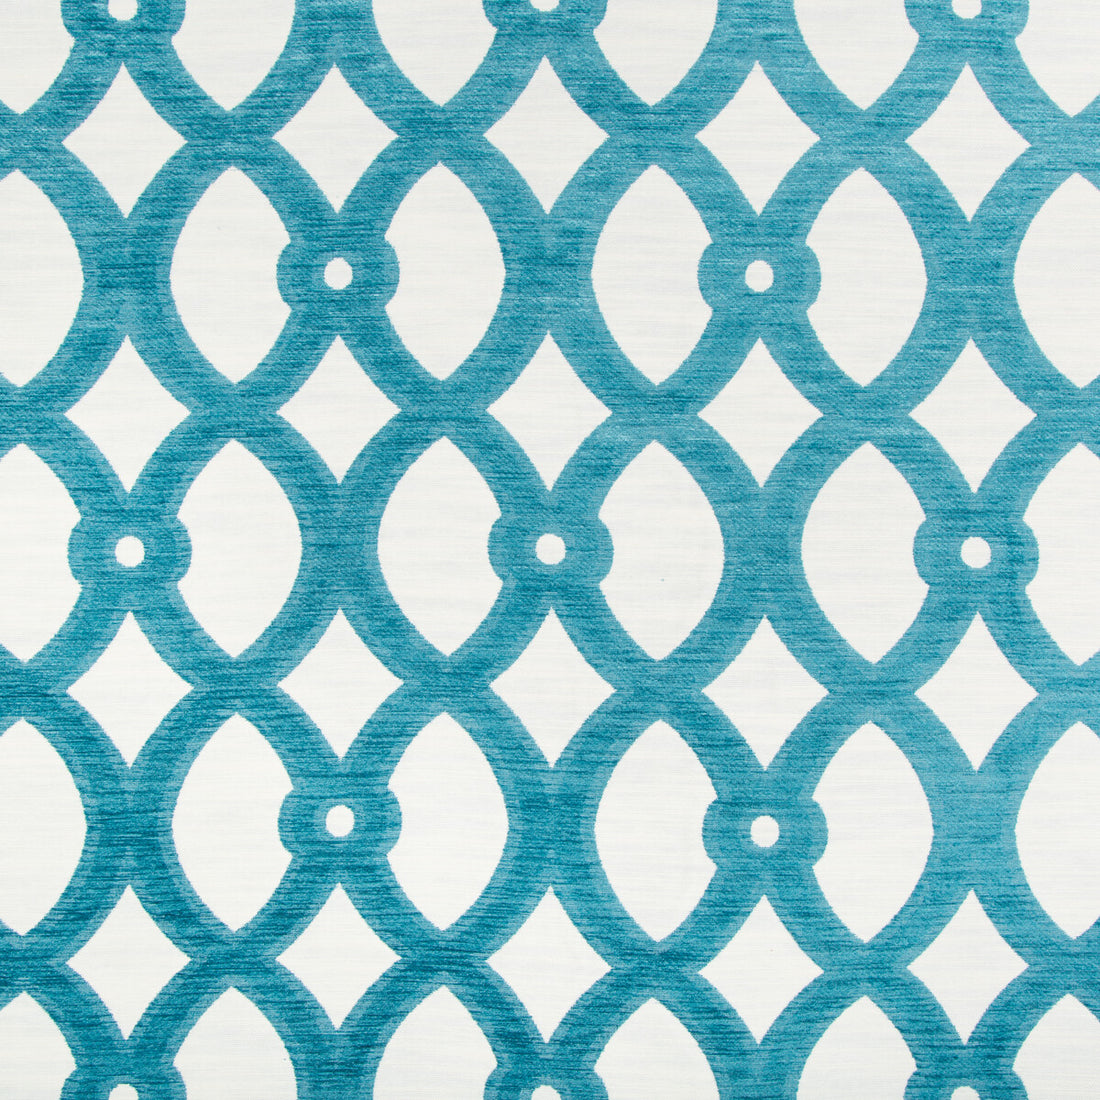 Kravet Design fabric in 34702-15 color - pattern 34702.15.0 - by Kravet Design in the Performance Crypton Home collection